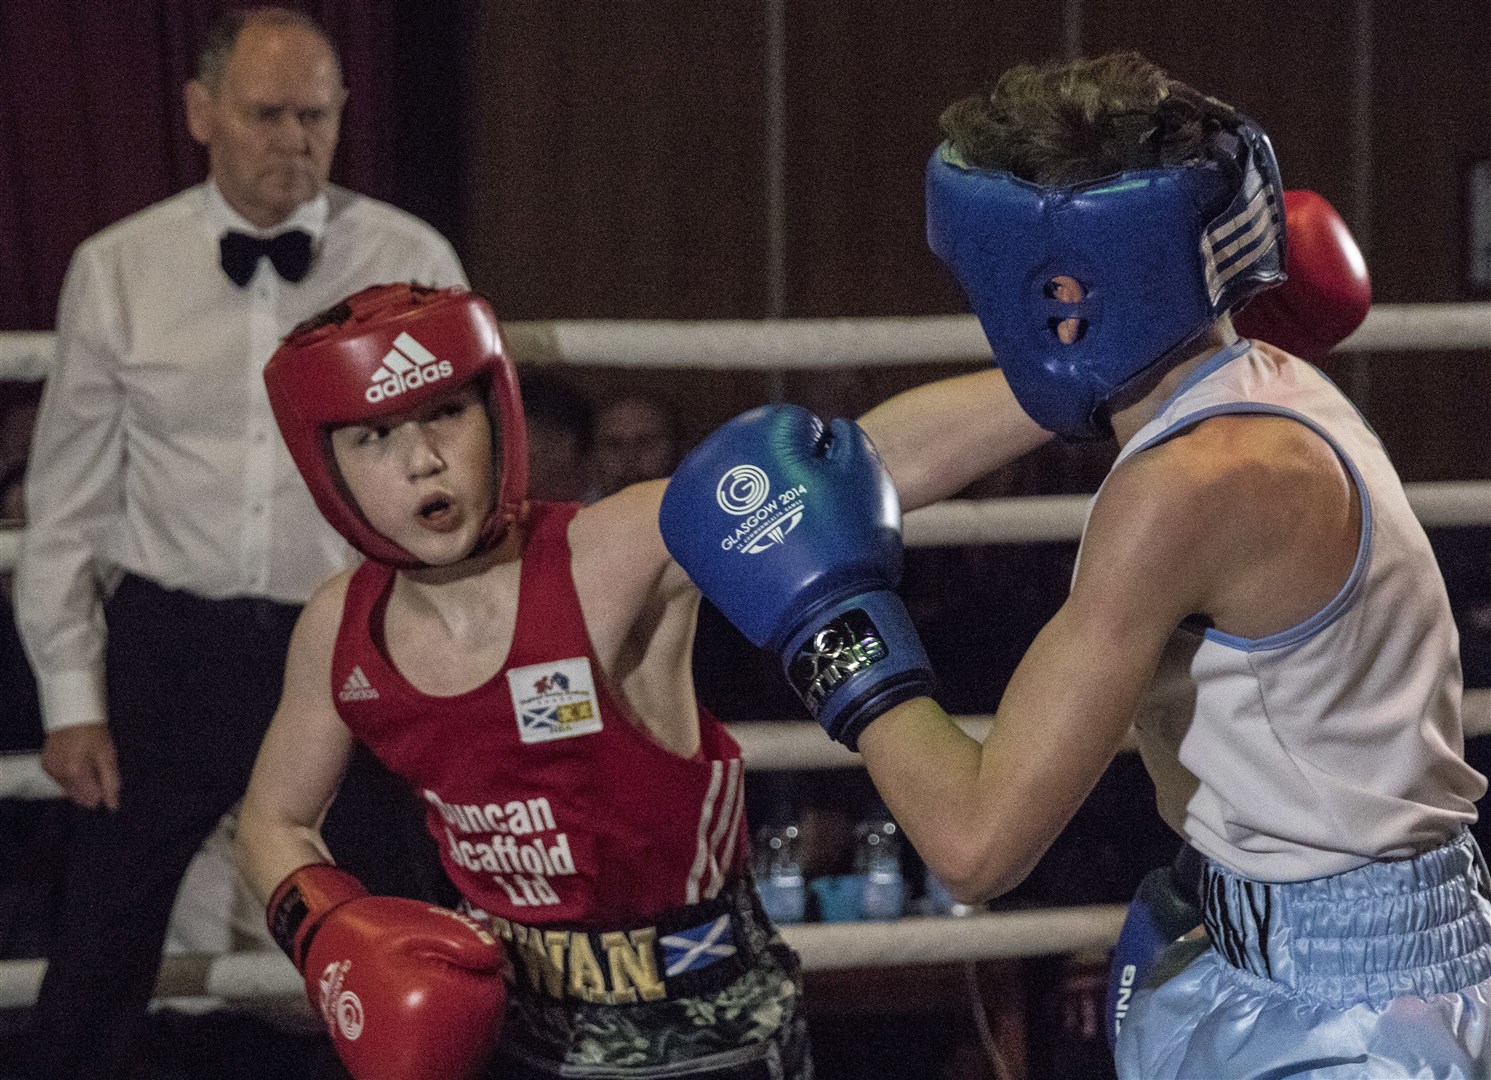 Ewan Gliniecki (red) won through two rounds before having to settle for a silver medal after being deducted a point for holding. Picture: David Rothnie